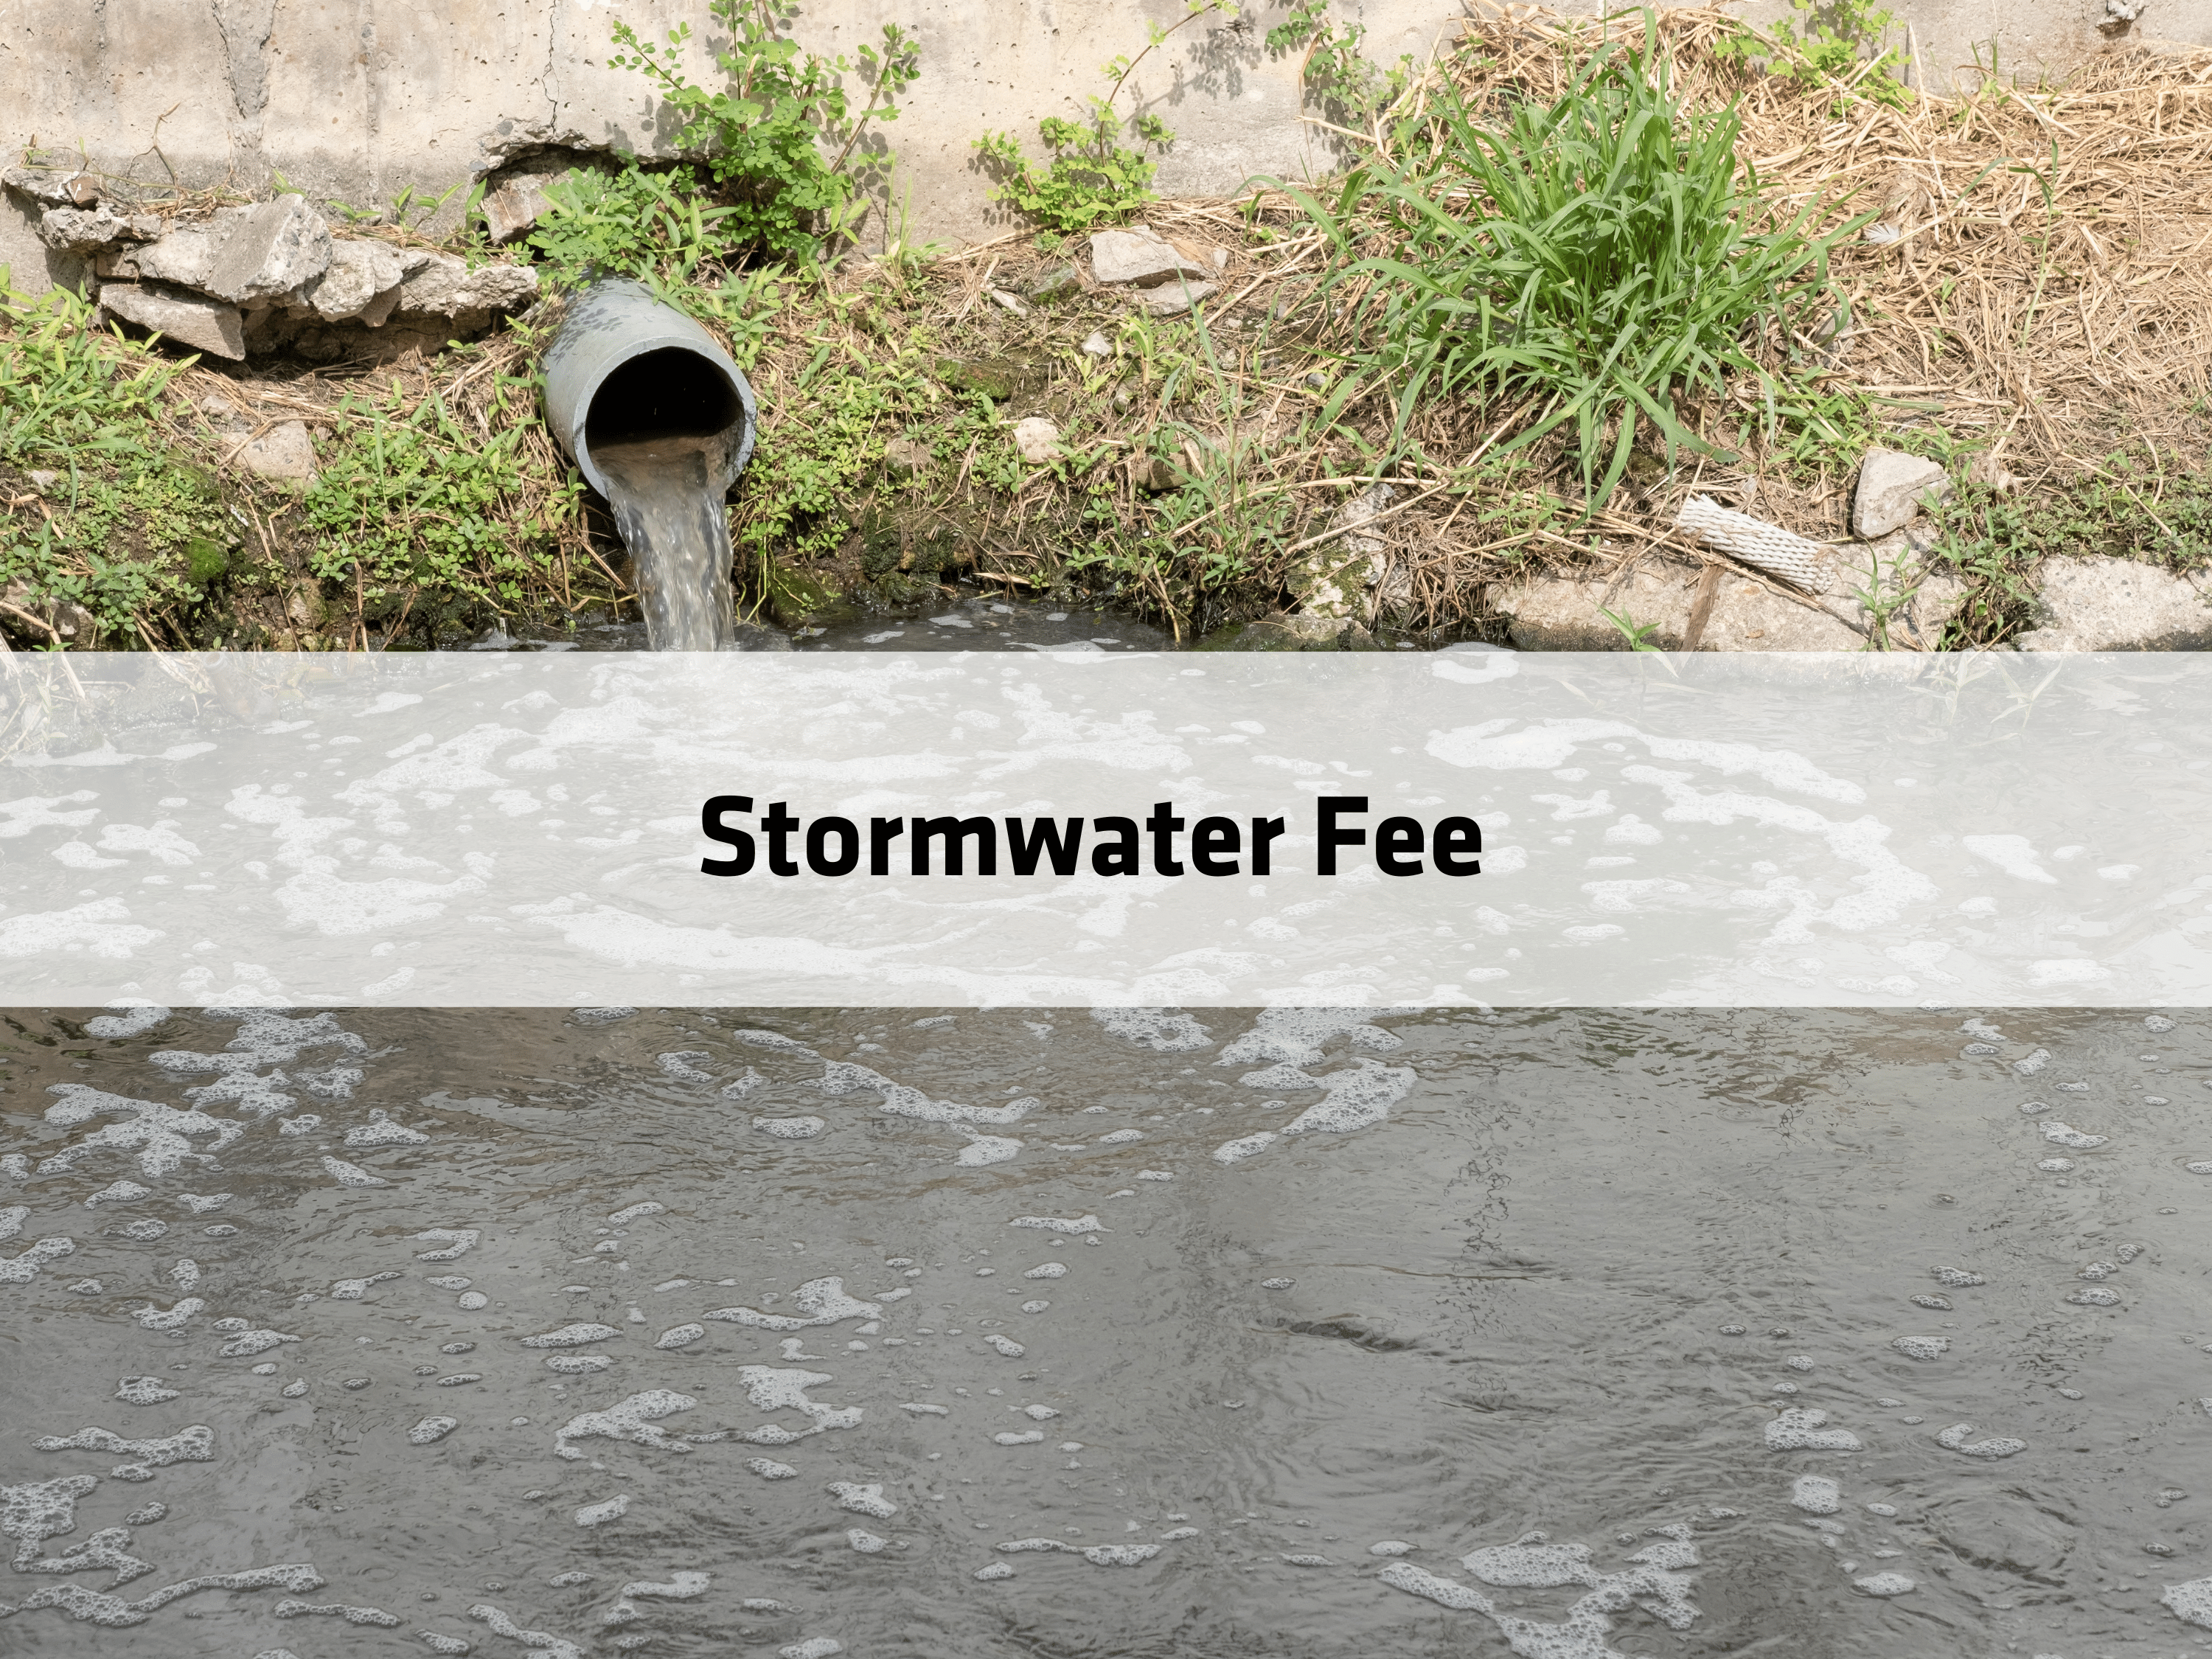 Stormwater Fee